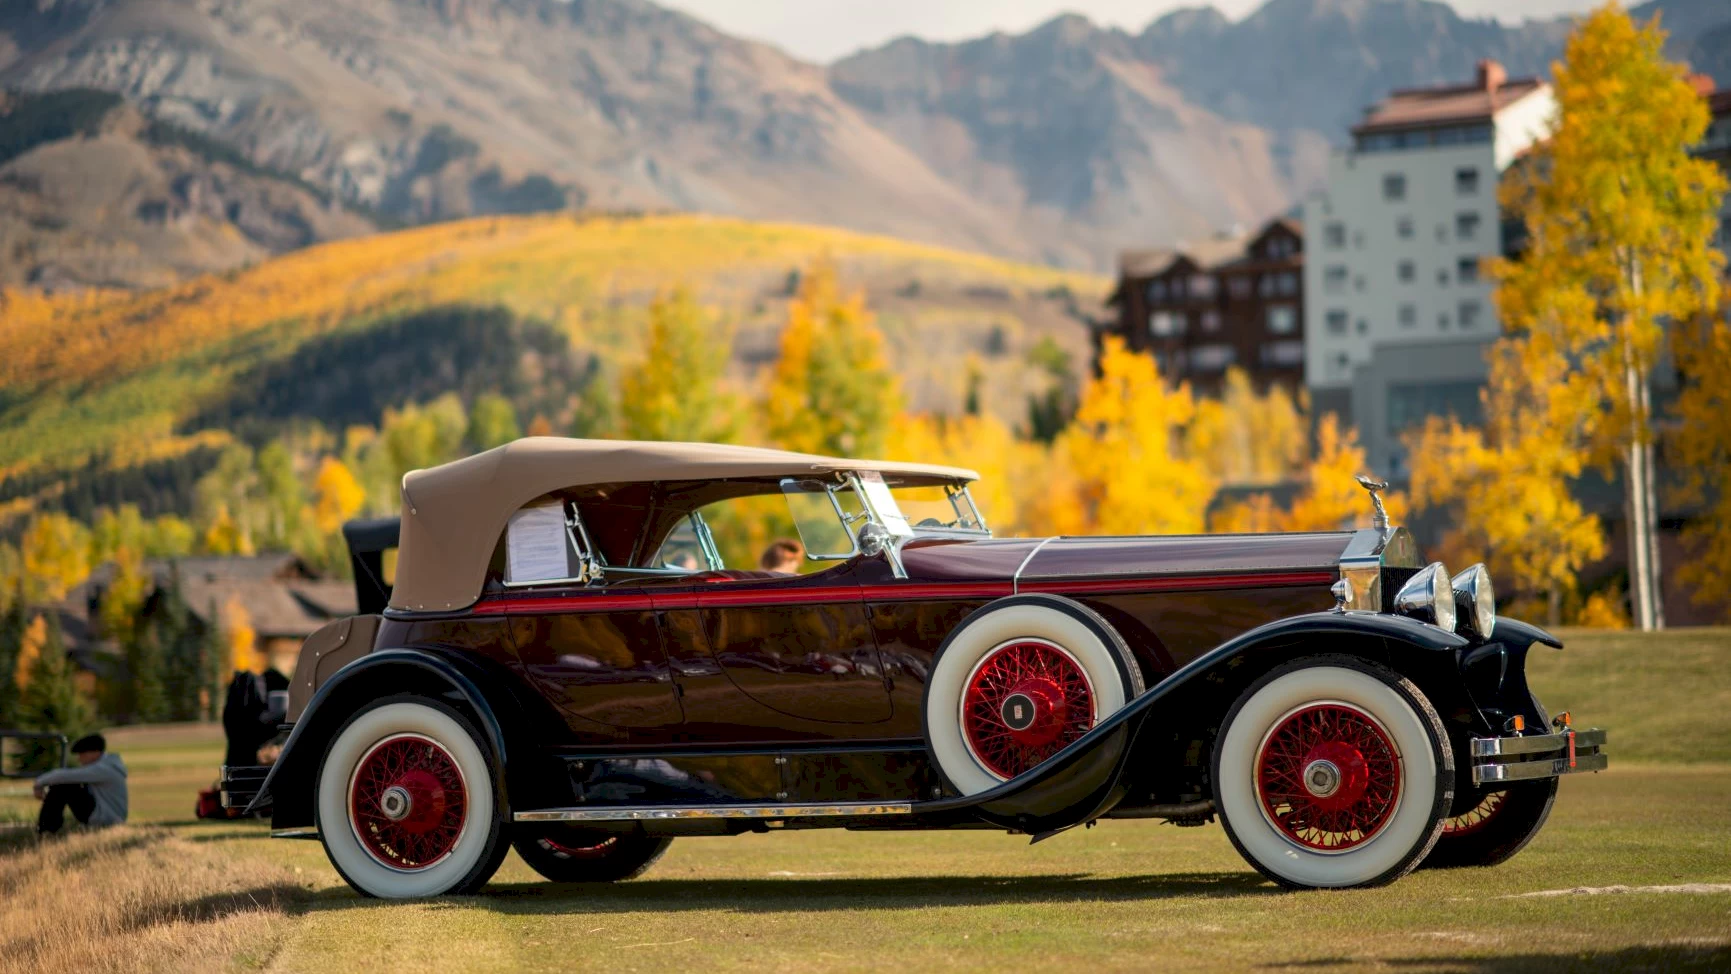 image of an old classic car parked on grass | Telluride Autumn Classic